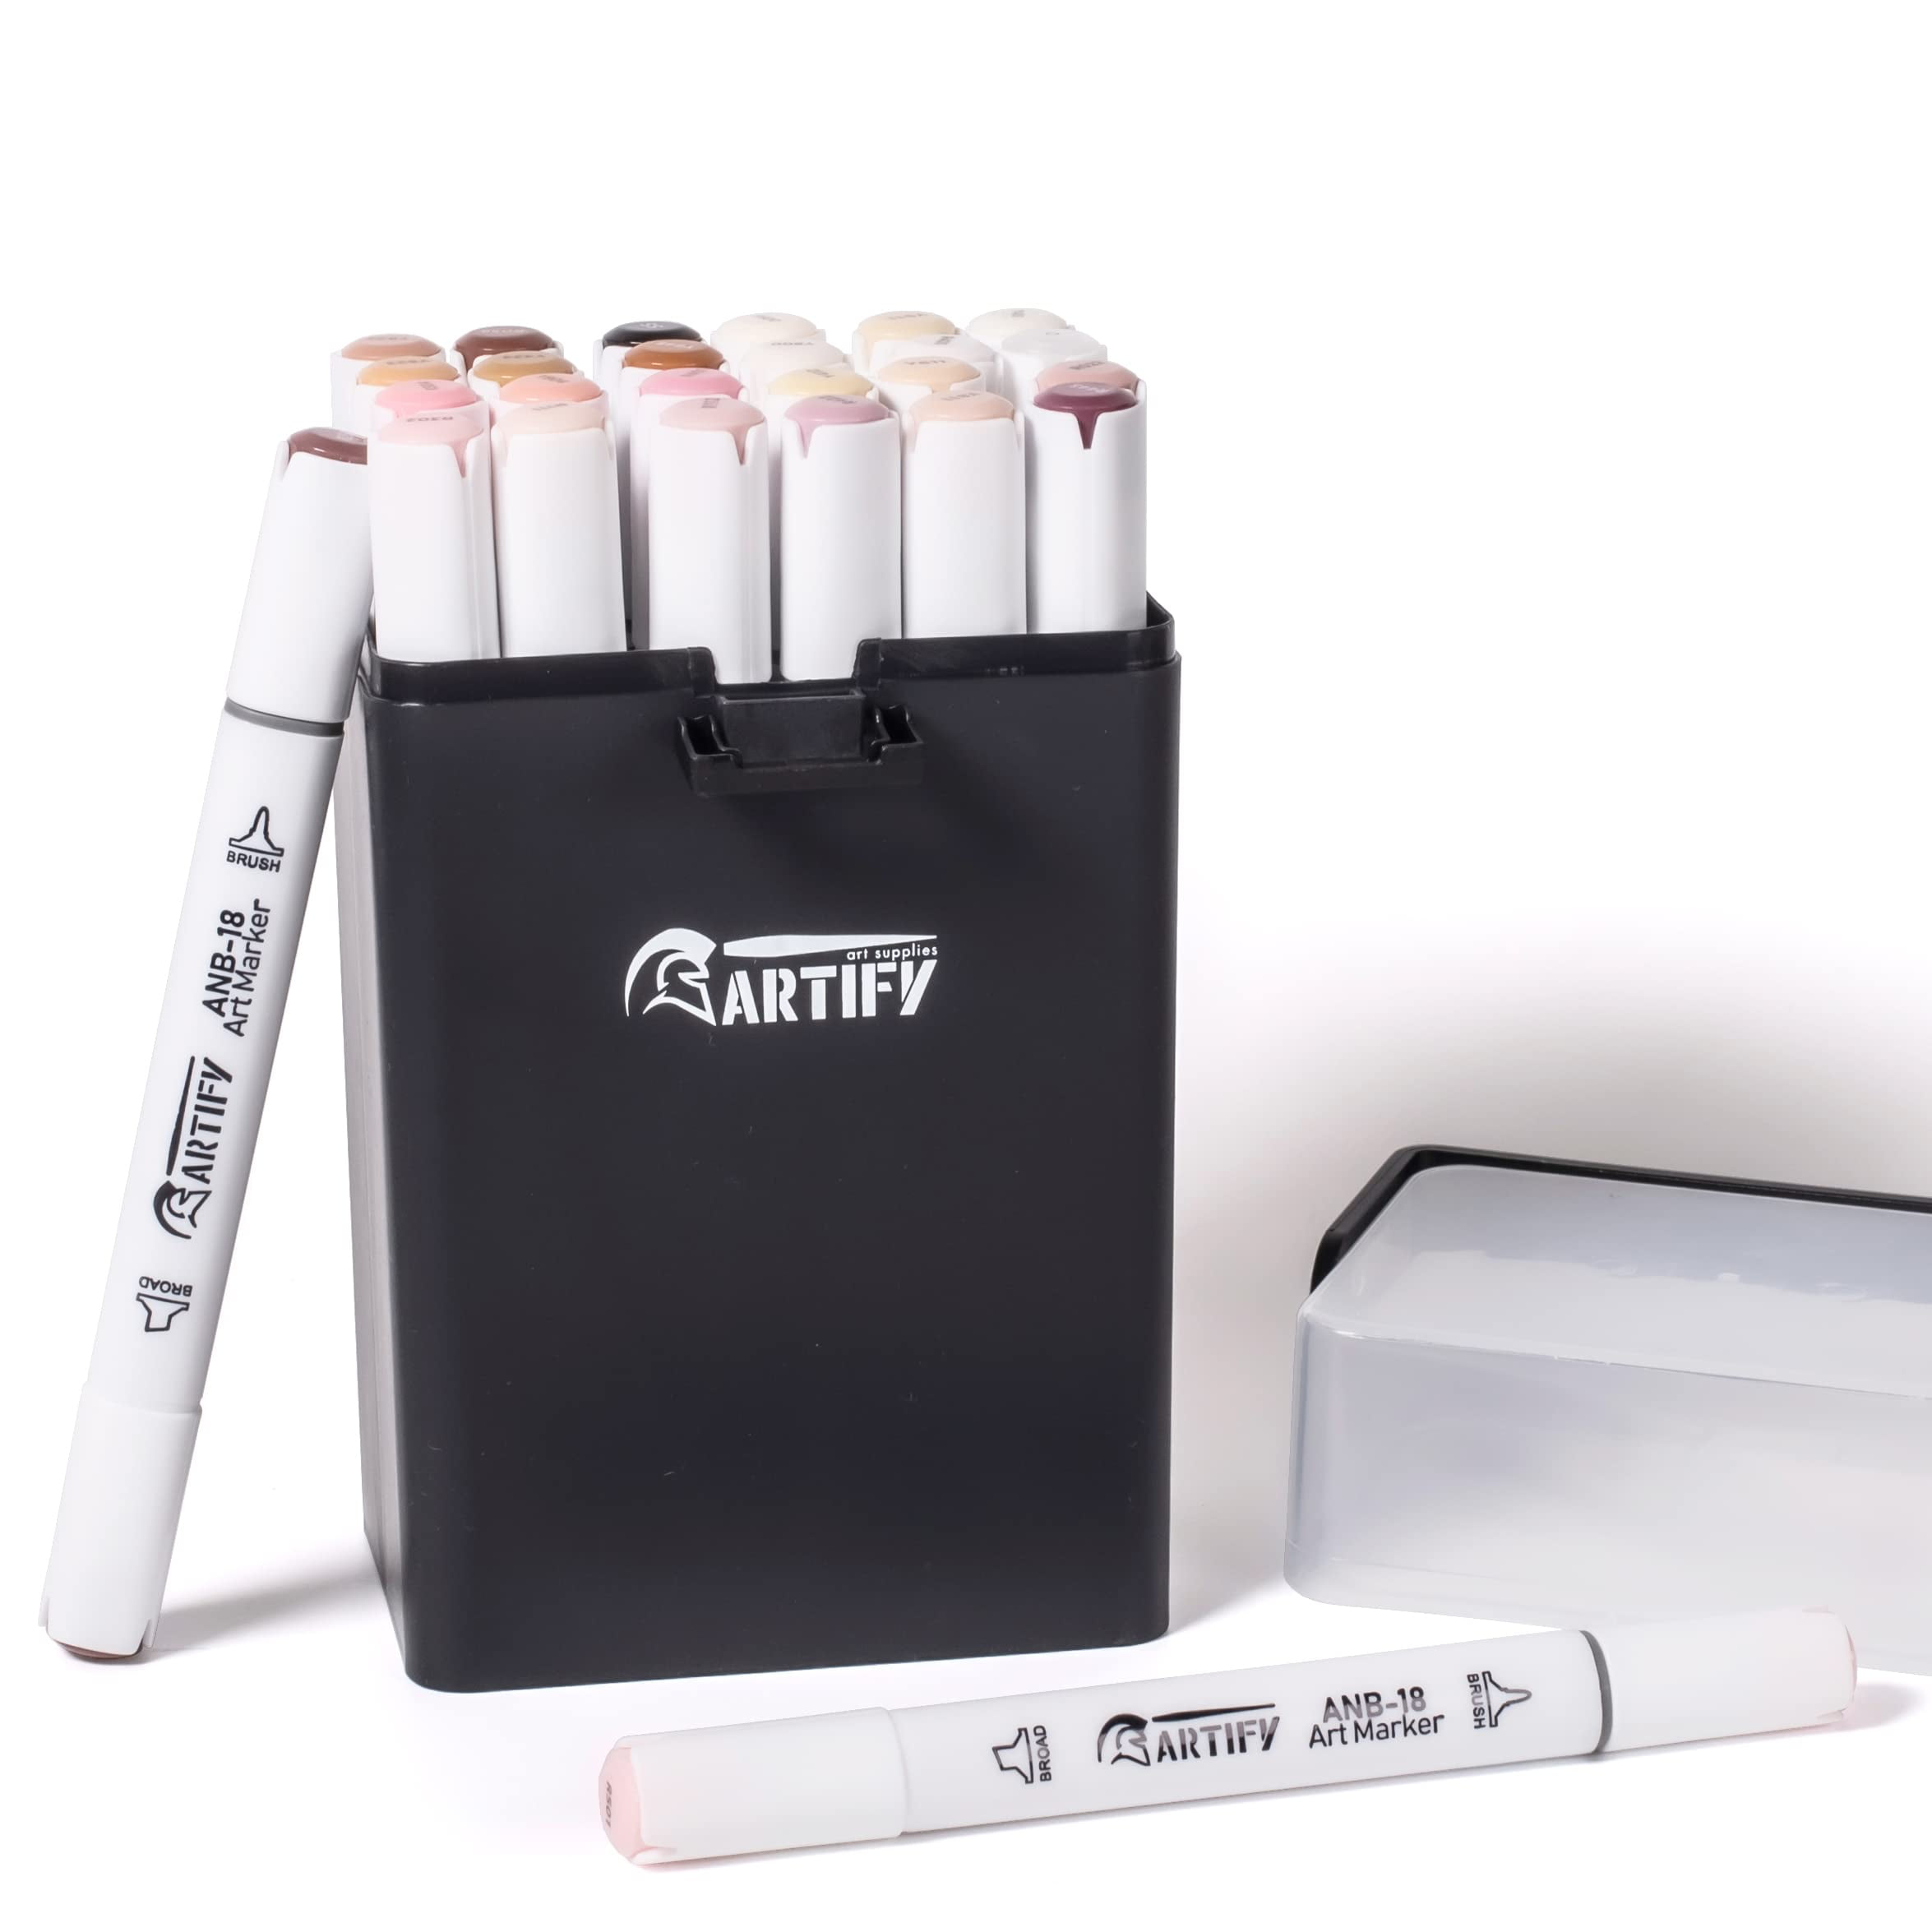 ARTIFY 120 Ultra Colors Art Markers, Fine & Broad Dual Tips Professional  Artist Markers in Case, Drawing Marker Set with Carrying Case